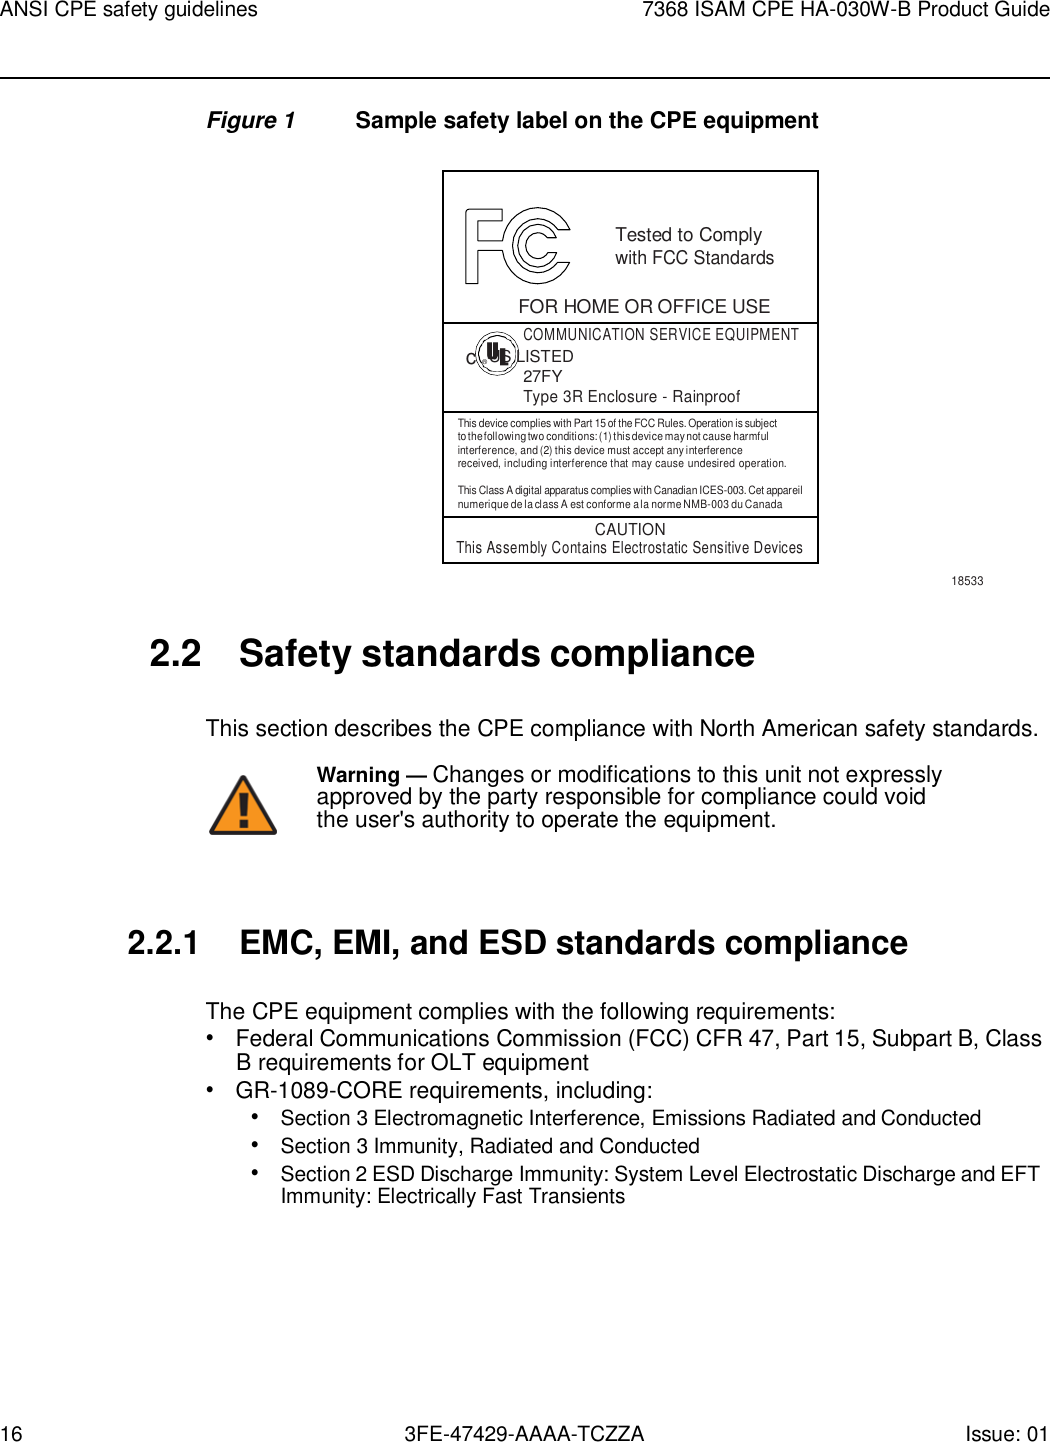 16 3FE-47429-AAAA-TCZZA Issue: 01 ANSI CPE safety guidelines 7368 ISAM CPE HA-030W-B Product Guide    Figure 1  Sample safety label on the CPE equipment    Tested to Comply with FCC Standards  FOR HOME OR OFFICE USE COMMUNICATION SERVICE EQUIPMENT c ® US LISTED 27FY Type 3R Enclosure - Rainproof This device complies with Part 15 of the FCC Rules. Operation is subject to the following two conditions: (1) this device may not cause harmful interference, and (2) this device must accept any interference received, including interference that may cause undesired operation.  This Class A digital apparatus complies with Canadian ICES-003. Cet appareil numerique de la class A est conforme a la norme NMB-003 du Canada CAUTION This Assembly Contains Electrostatic Sensitive Devices 18533   2.2  Safety standards compliance  This section describes the CPE compliance with North American safety standards. Warning — Changes or modifications to this unit not expressly approved by the party responsible for compliance could void the user&apos;s authority to operate the equipment.    2.2.1 EMC, EMI, and ESD standards compliance  The CPE equipment complies with the following requirements: • Federal Communications Commission (FCC) CFR 47, Part 15, Subpart B, Class B requirements for OLT equipment • GR-1089-CORE requirements, including: • Section 3 Electromagnetic Interference, Emissions Radiated and Conducted • Section 3 Immunity, Radiated and Conducted • Section 2 ESD Discharge Immunity: System Level Electrostatic Discharge and EFT Immunity: Electrically Fast Transients 